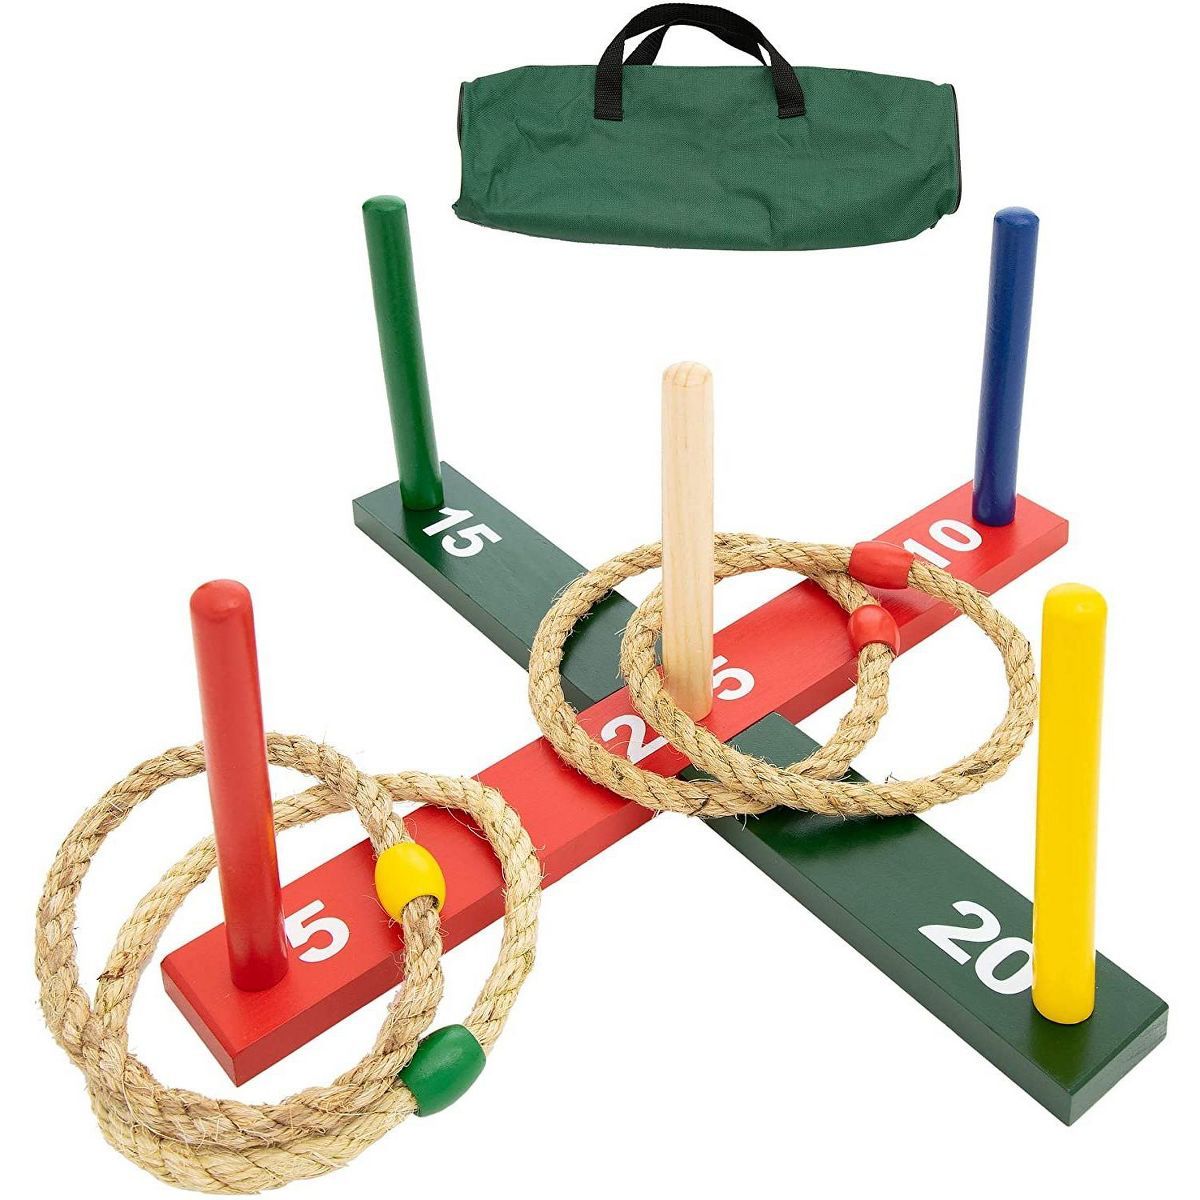 WE Games Rope Ring Toss Yard Game - Throwing Carnival Quoits Set - Solid Wood | Target